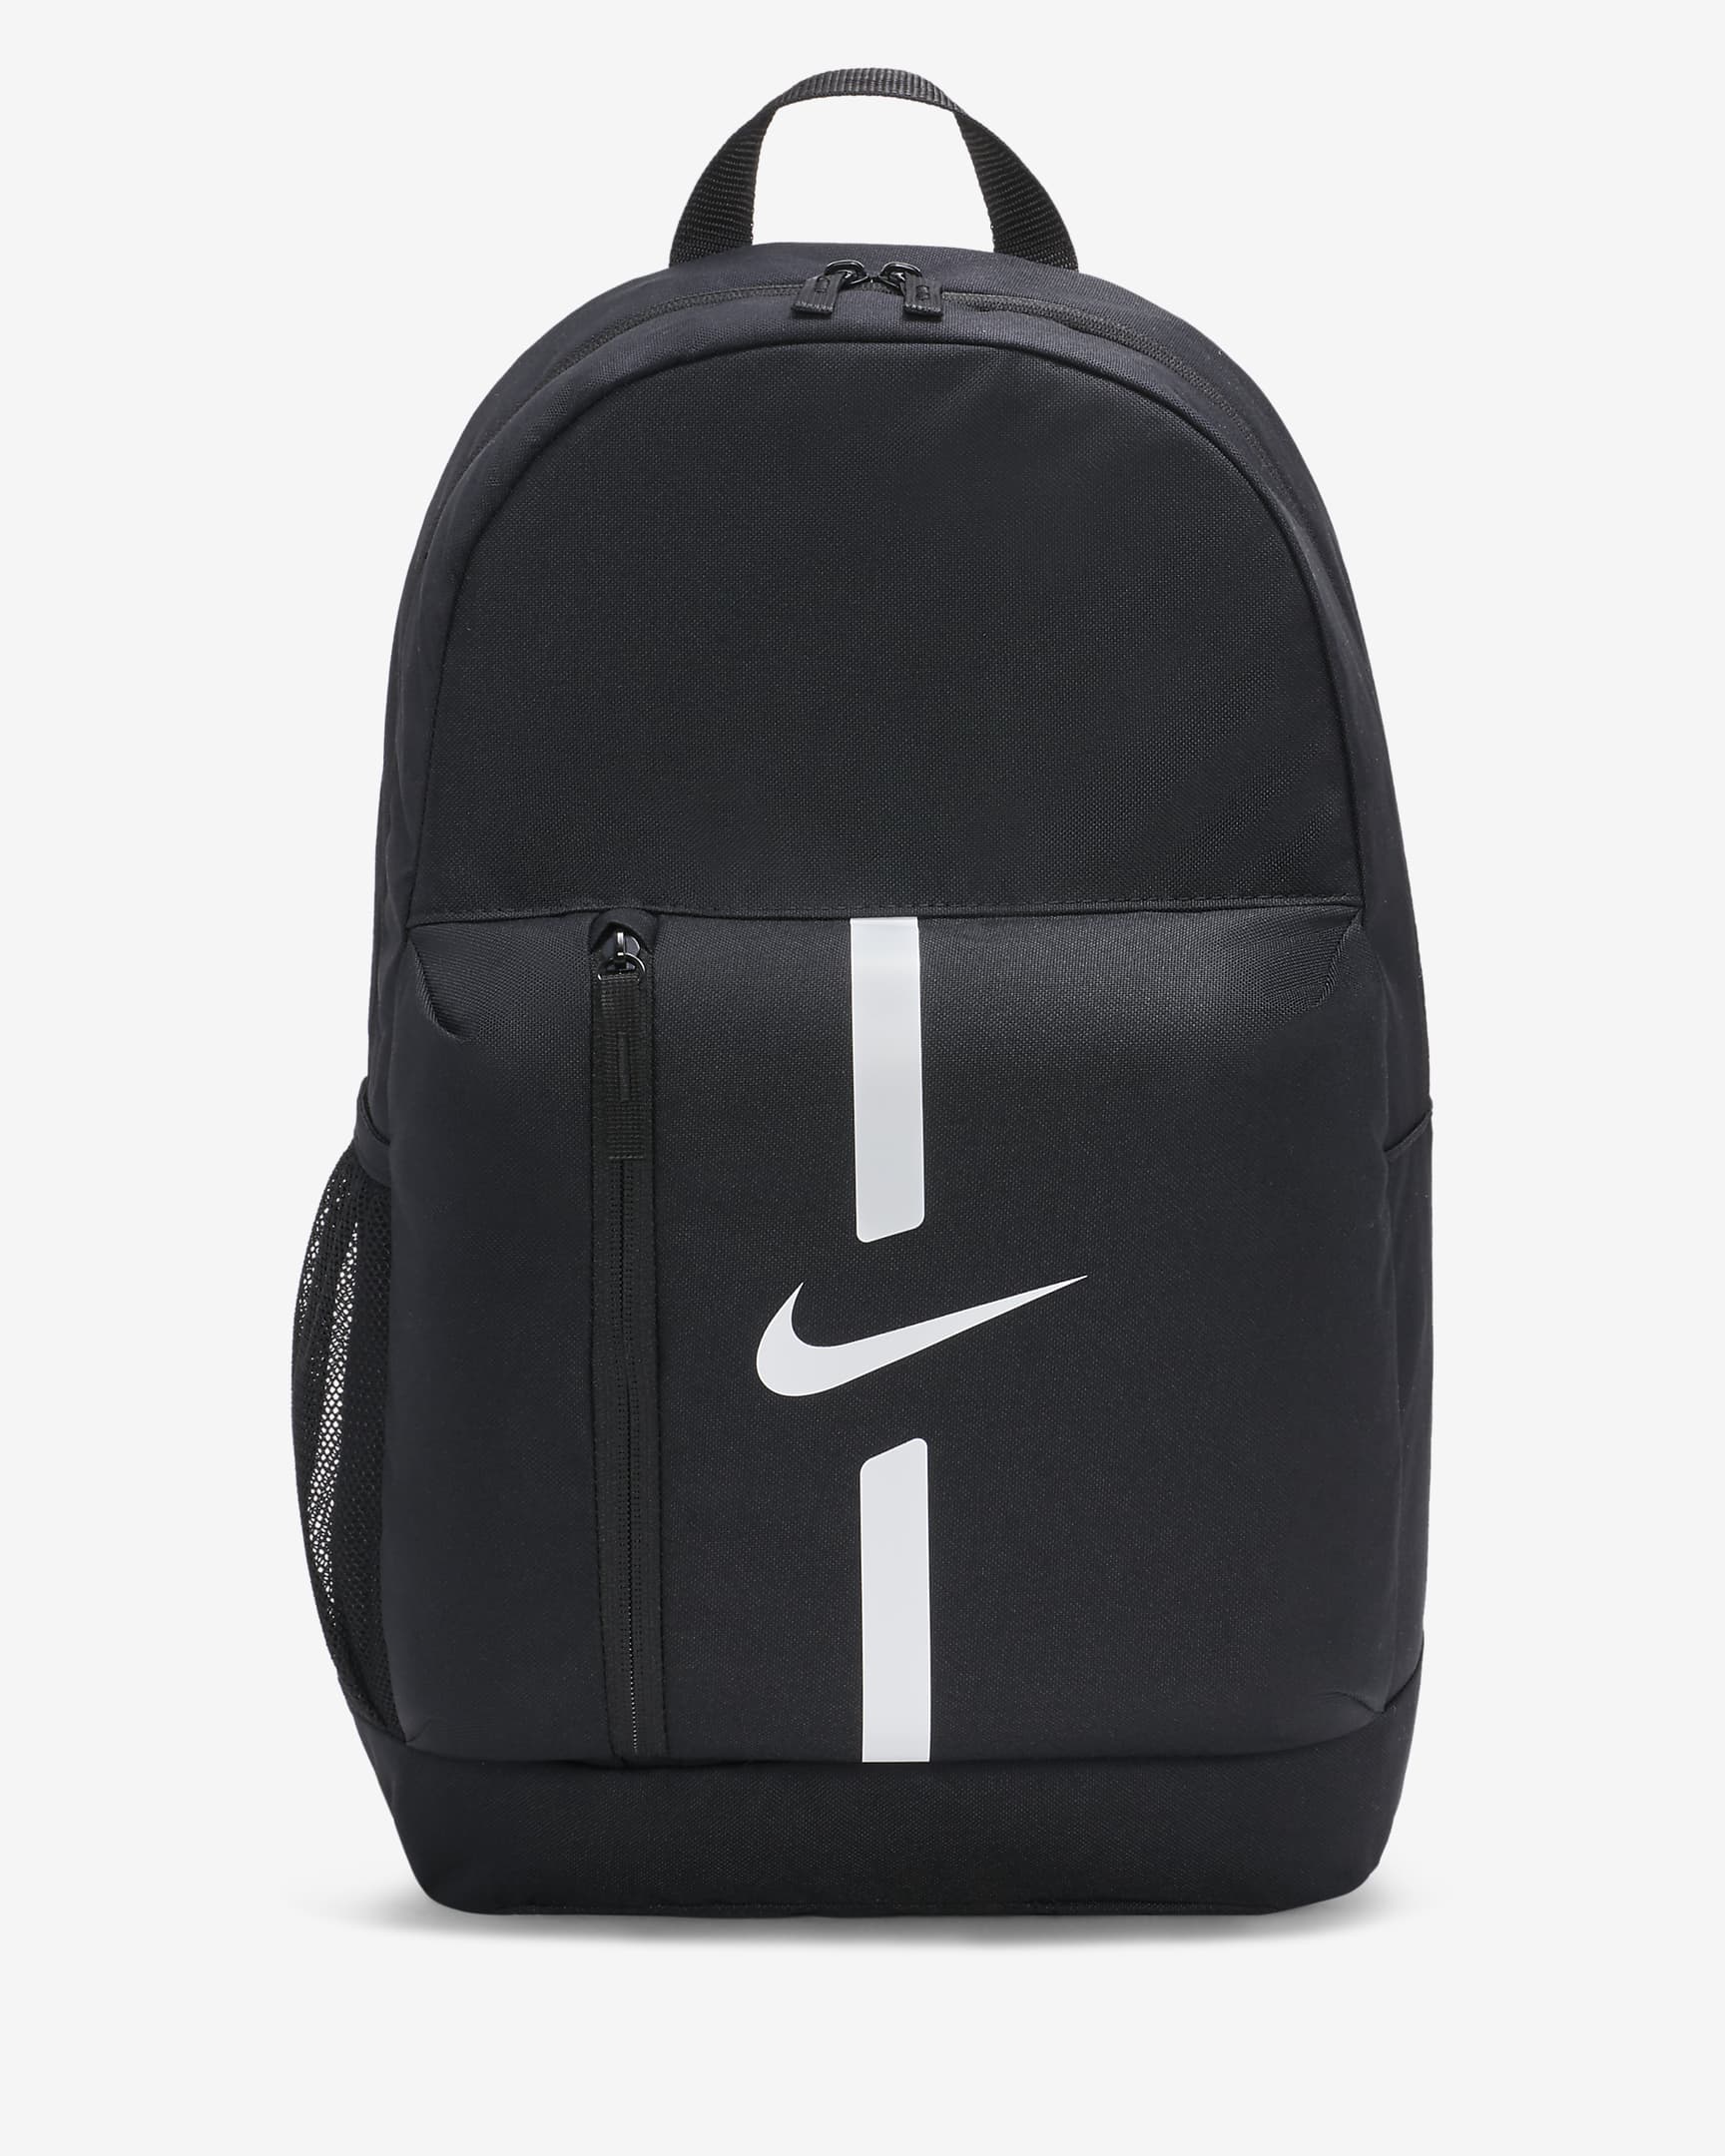 Nike Academy Team Backpack - Queensferry Sports